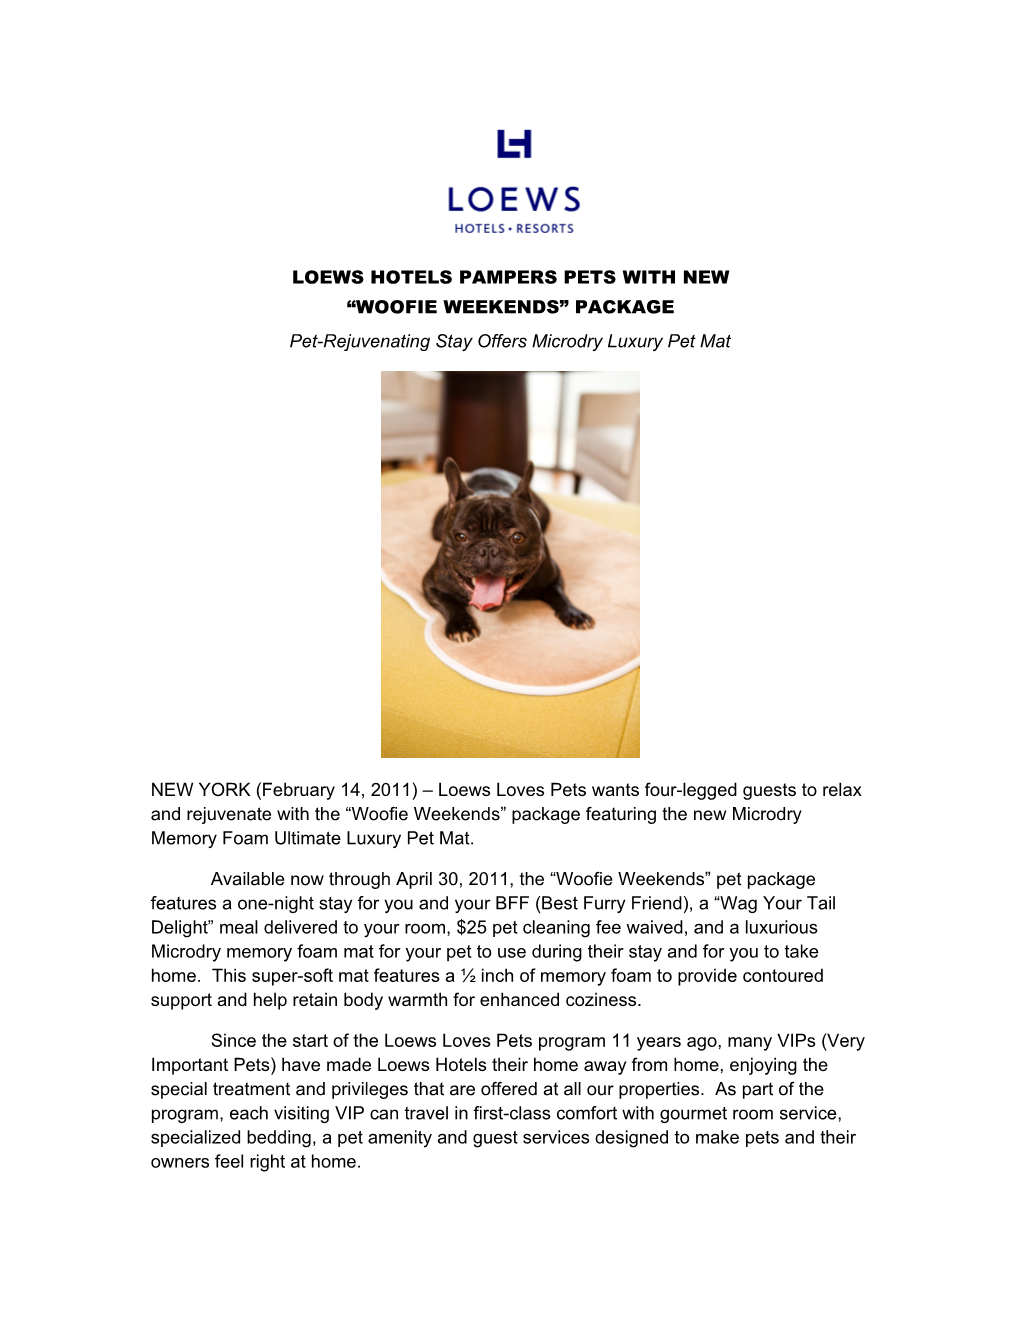 LOEWS HOTELS PAMPERS PETS with NEW WOOFIE WEEKENDS PACKAGE Pet-Rejuvenating Stay Offers